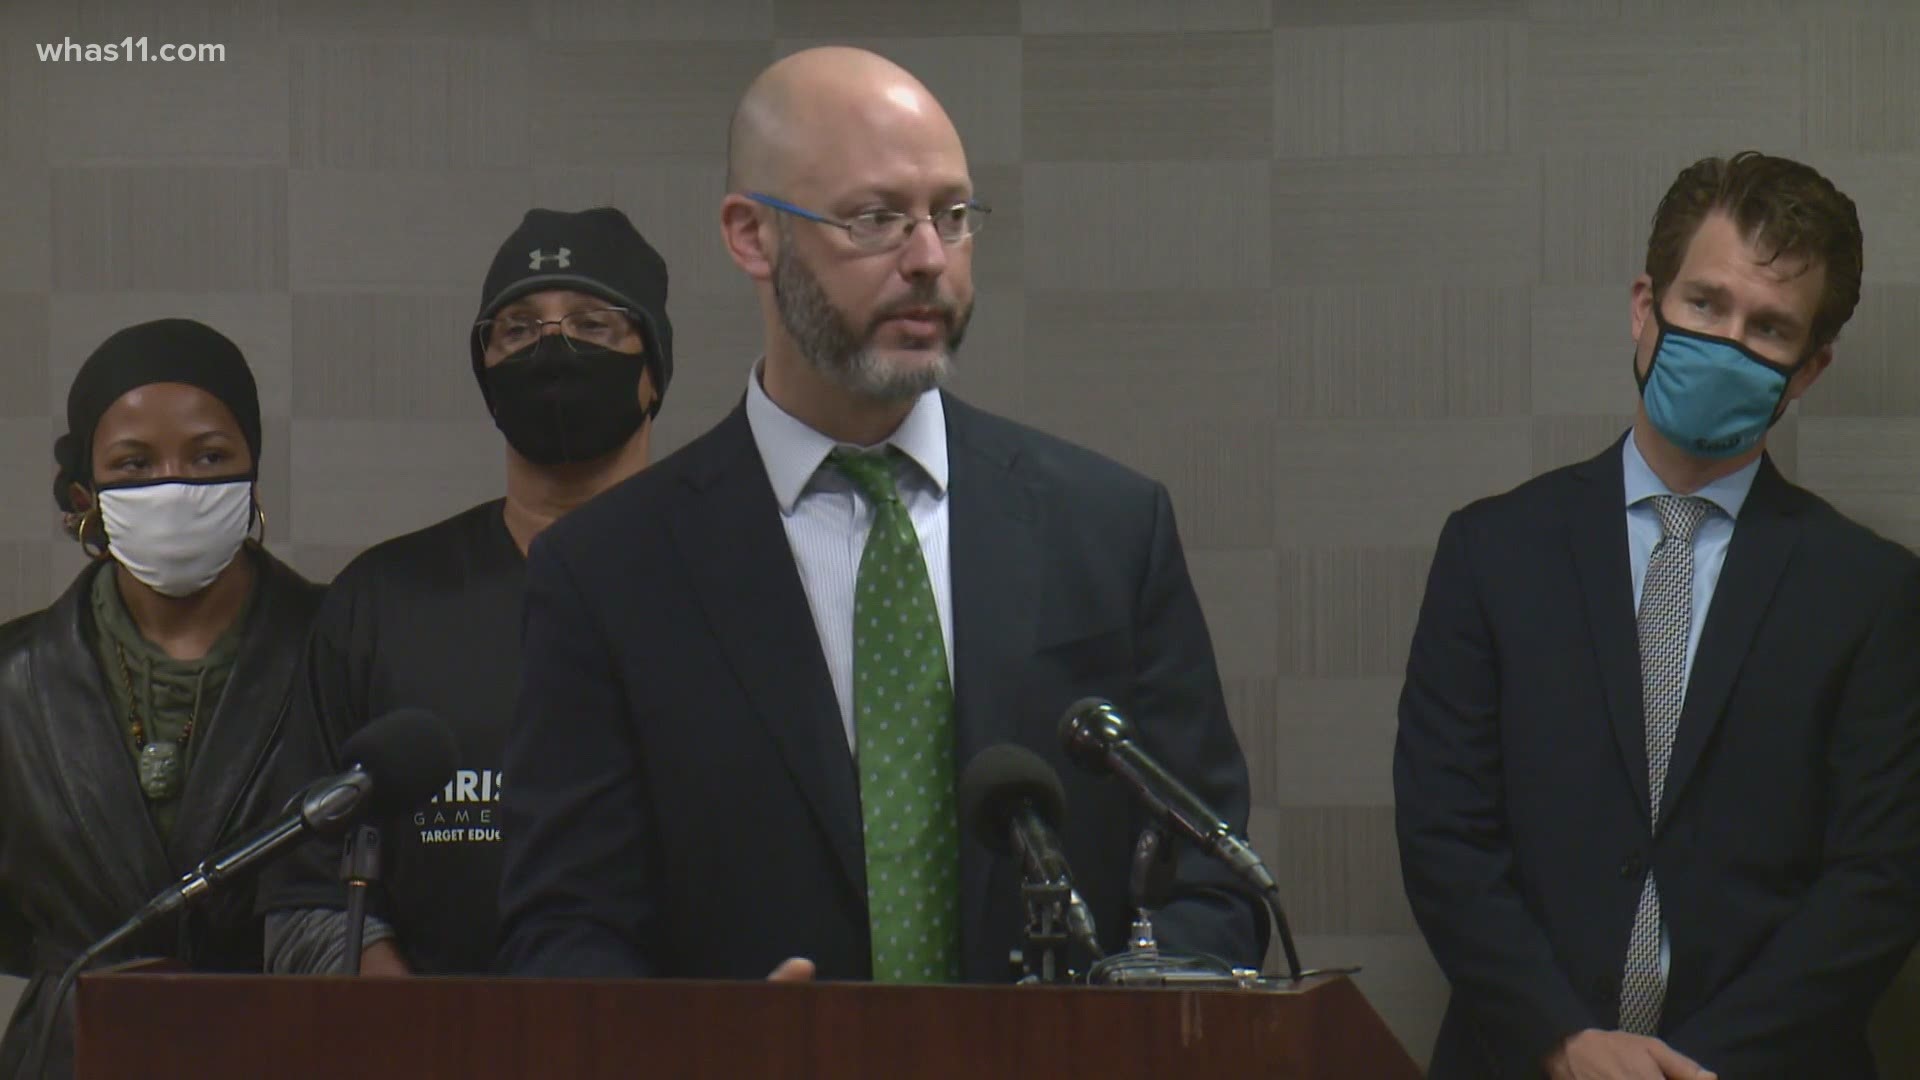 Attorney Kevin Glogower said Daniel Cameron has already undone the secrecy of the grand jury, saying the juror should be able to speak about the process.